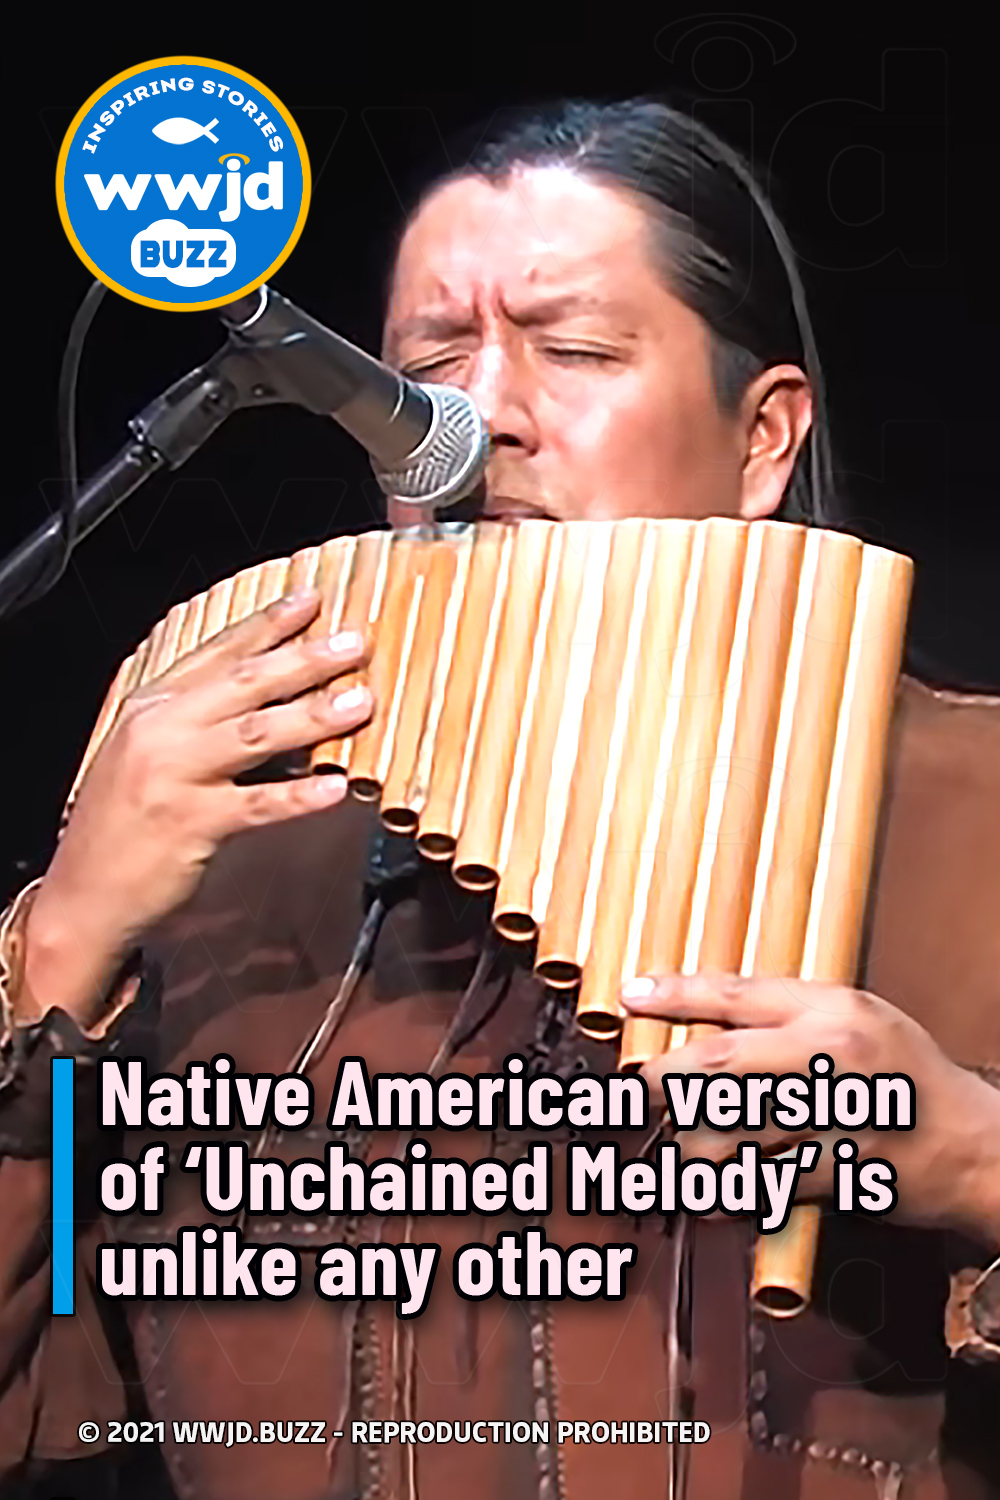 Native American version of ‘Unchained Melody’ is unlike any other